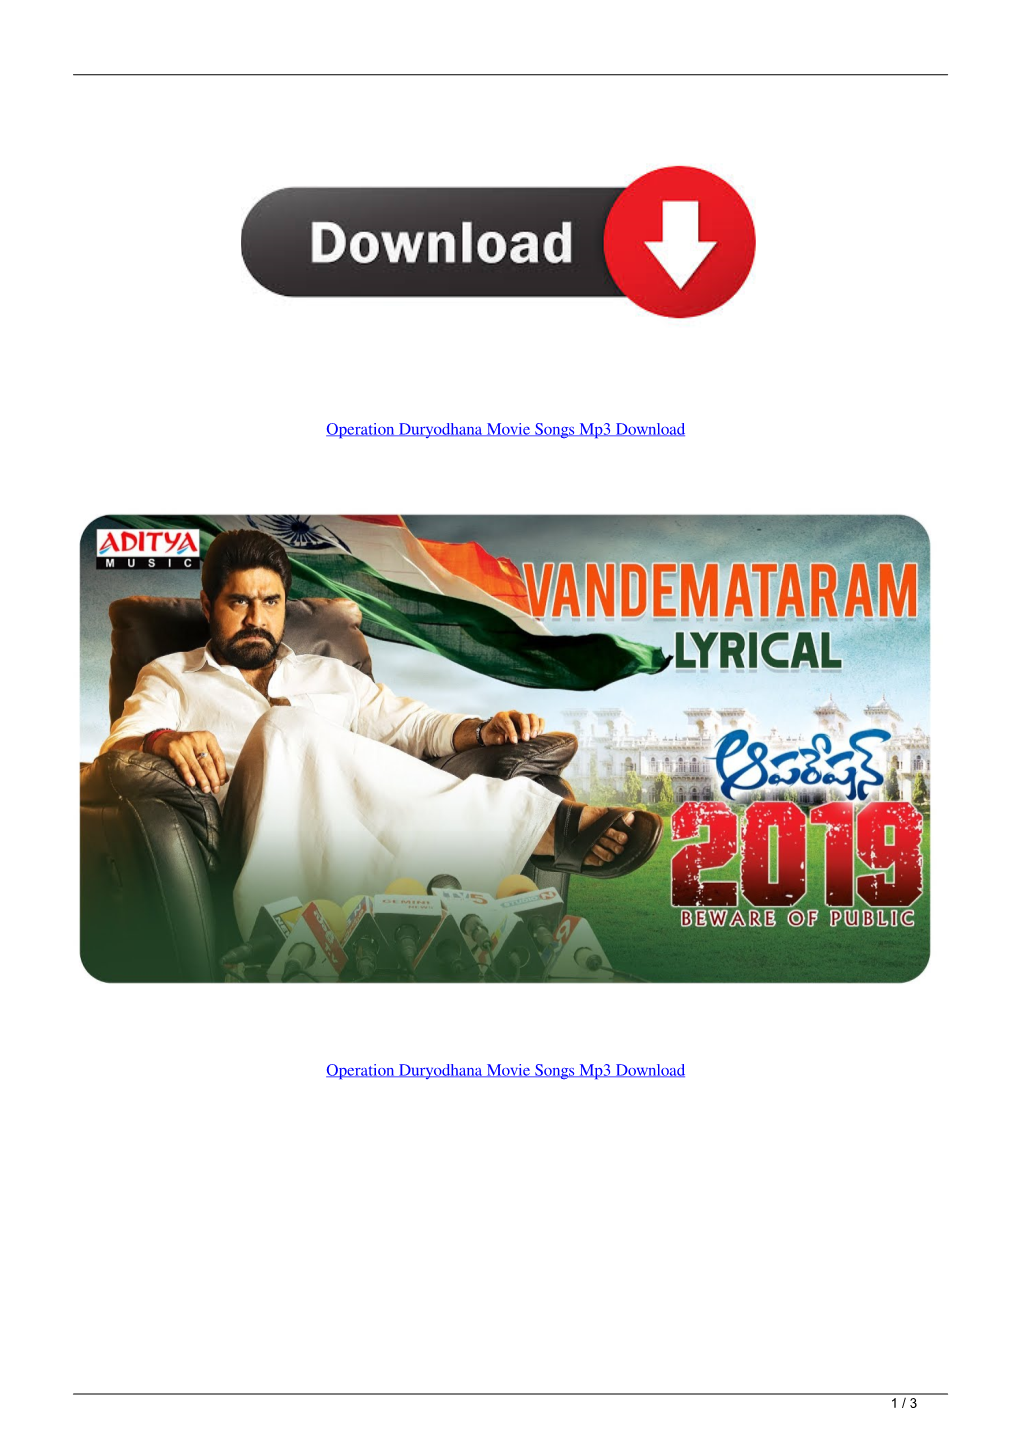 Operation Duryodhana Movie Songs Mp3 Download